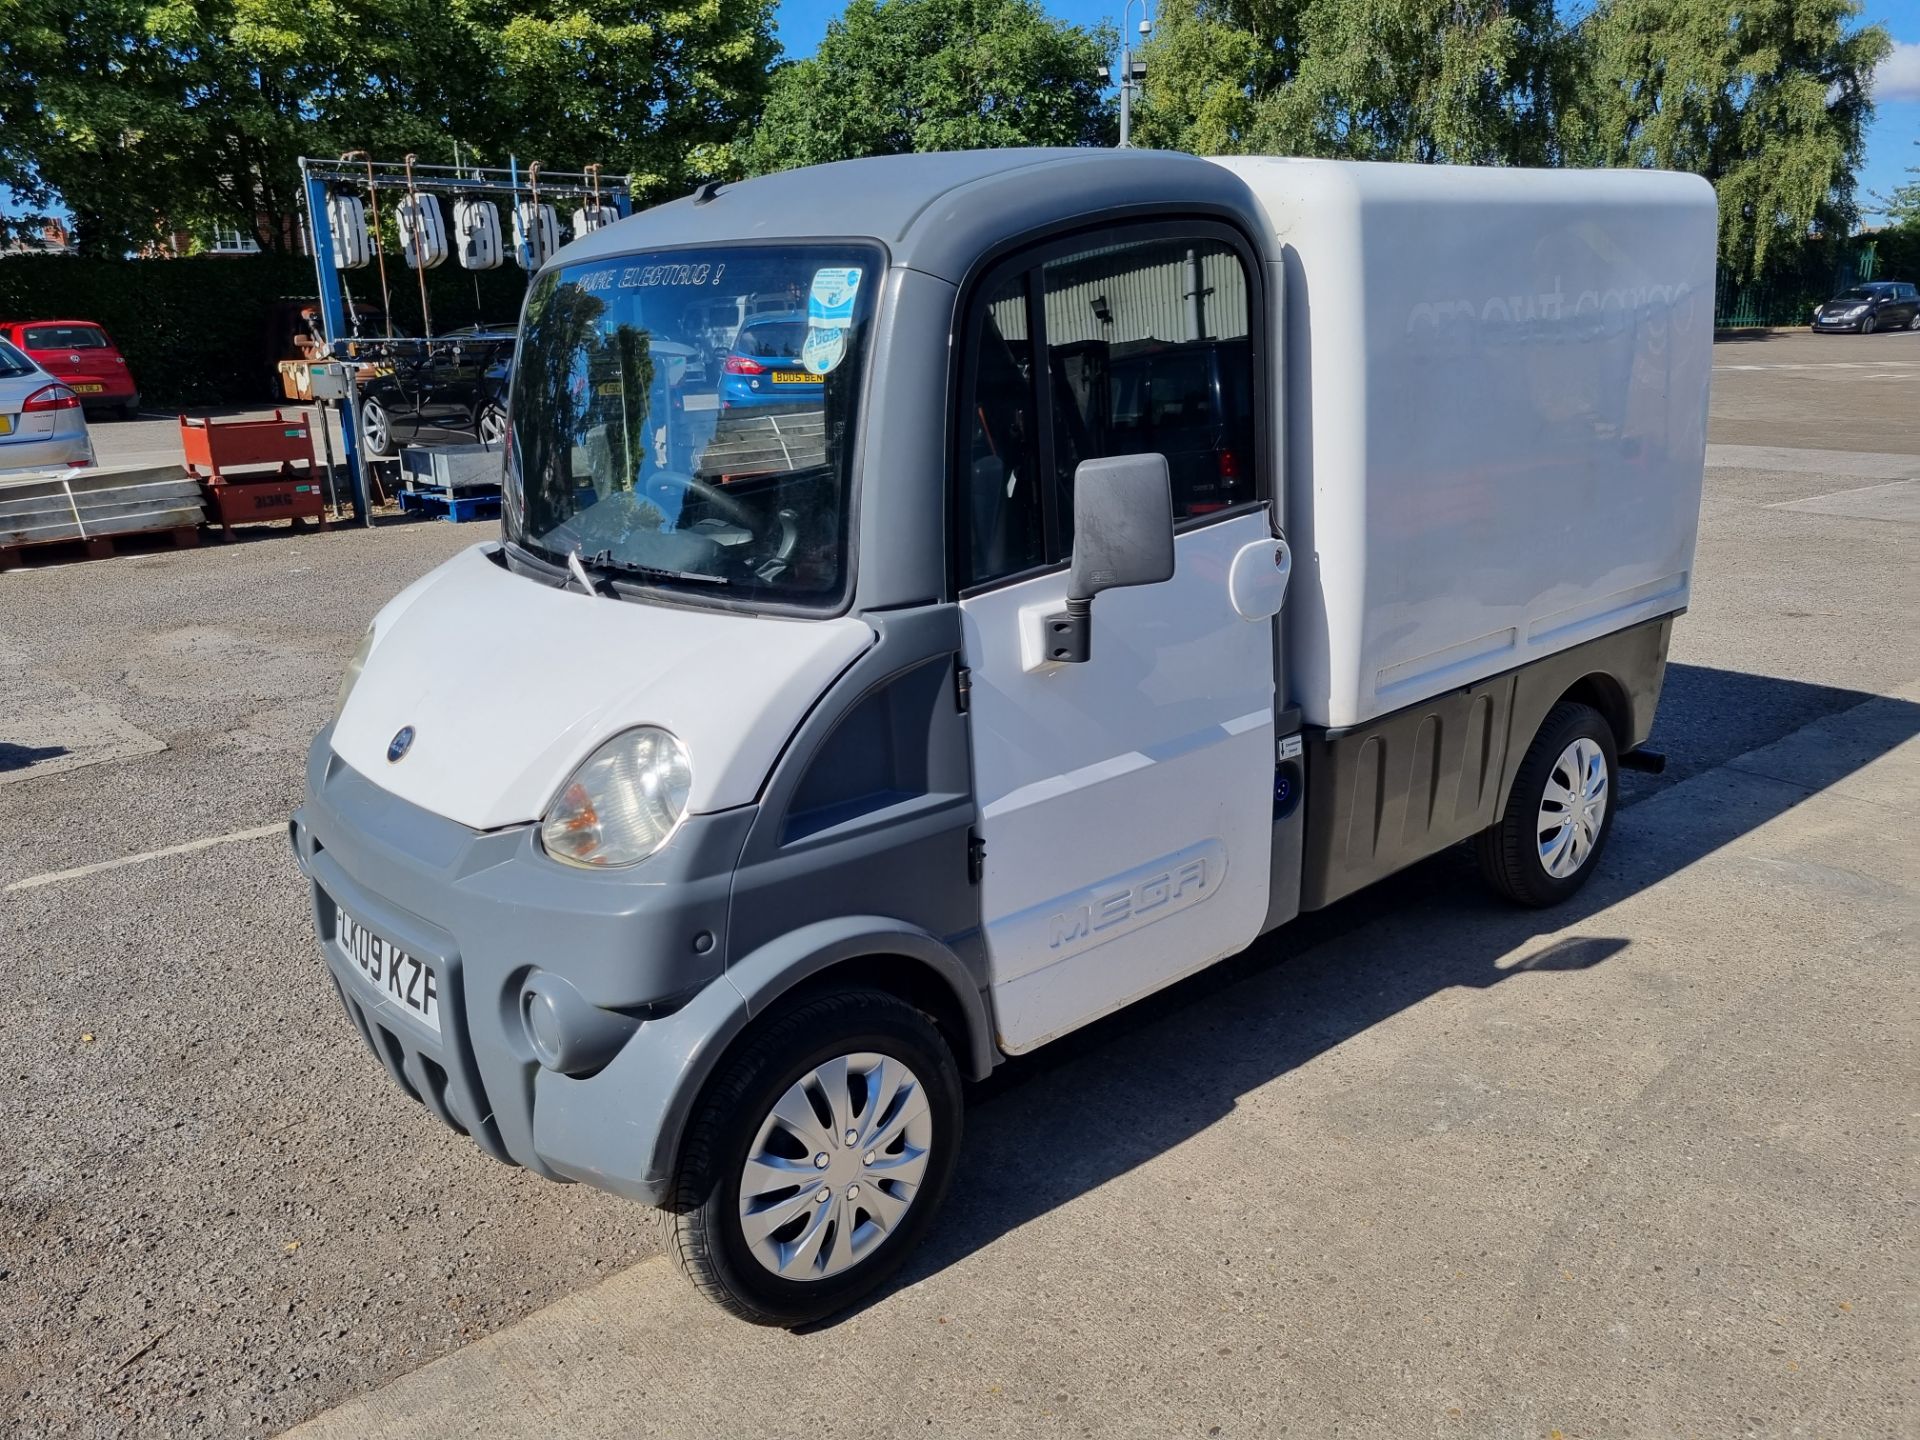 Aixam Mega 600 Electric Van - White - 2009 - 3.6 hours on brand new batteries - Image 3 of 24